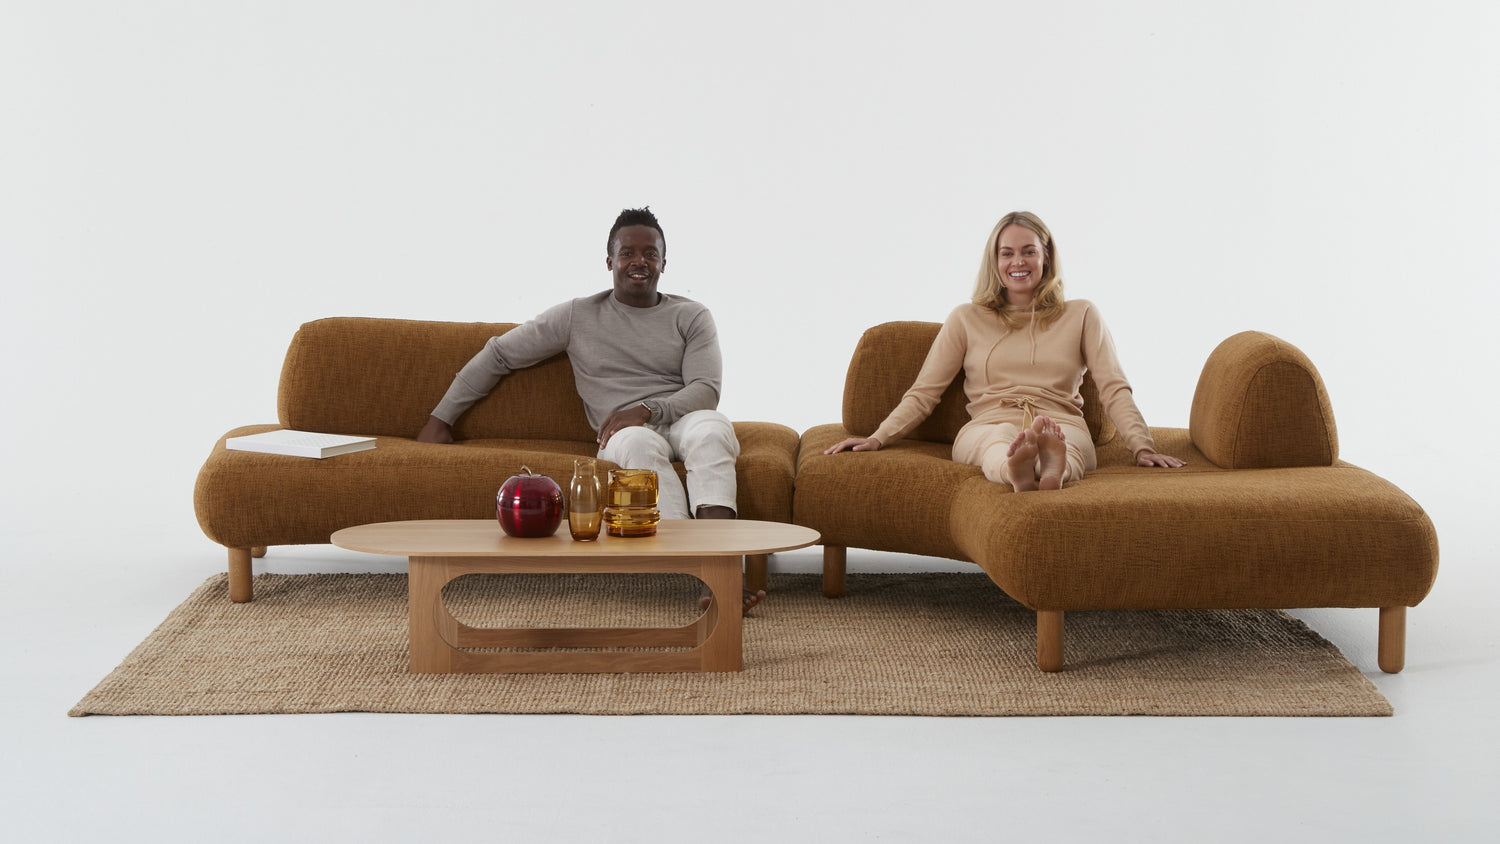 Two modules of the Locus modular lounge with an Ethos table and a man sitting on one and a woman lying on the other.